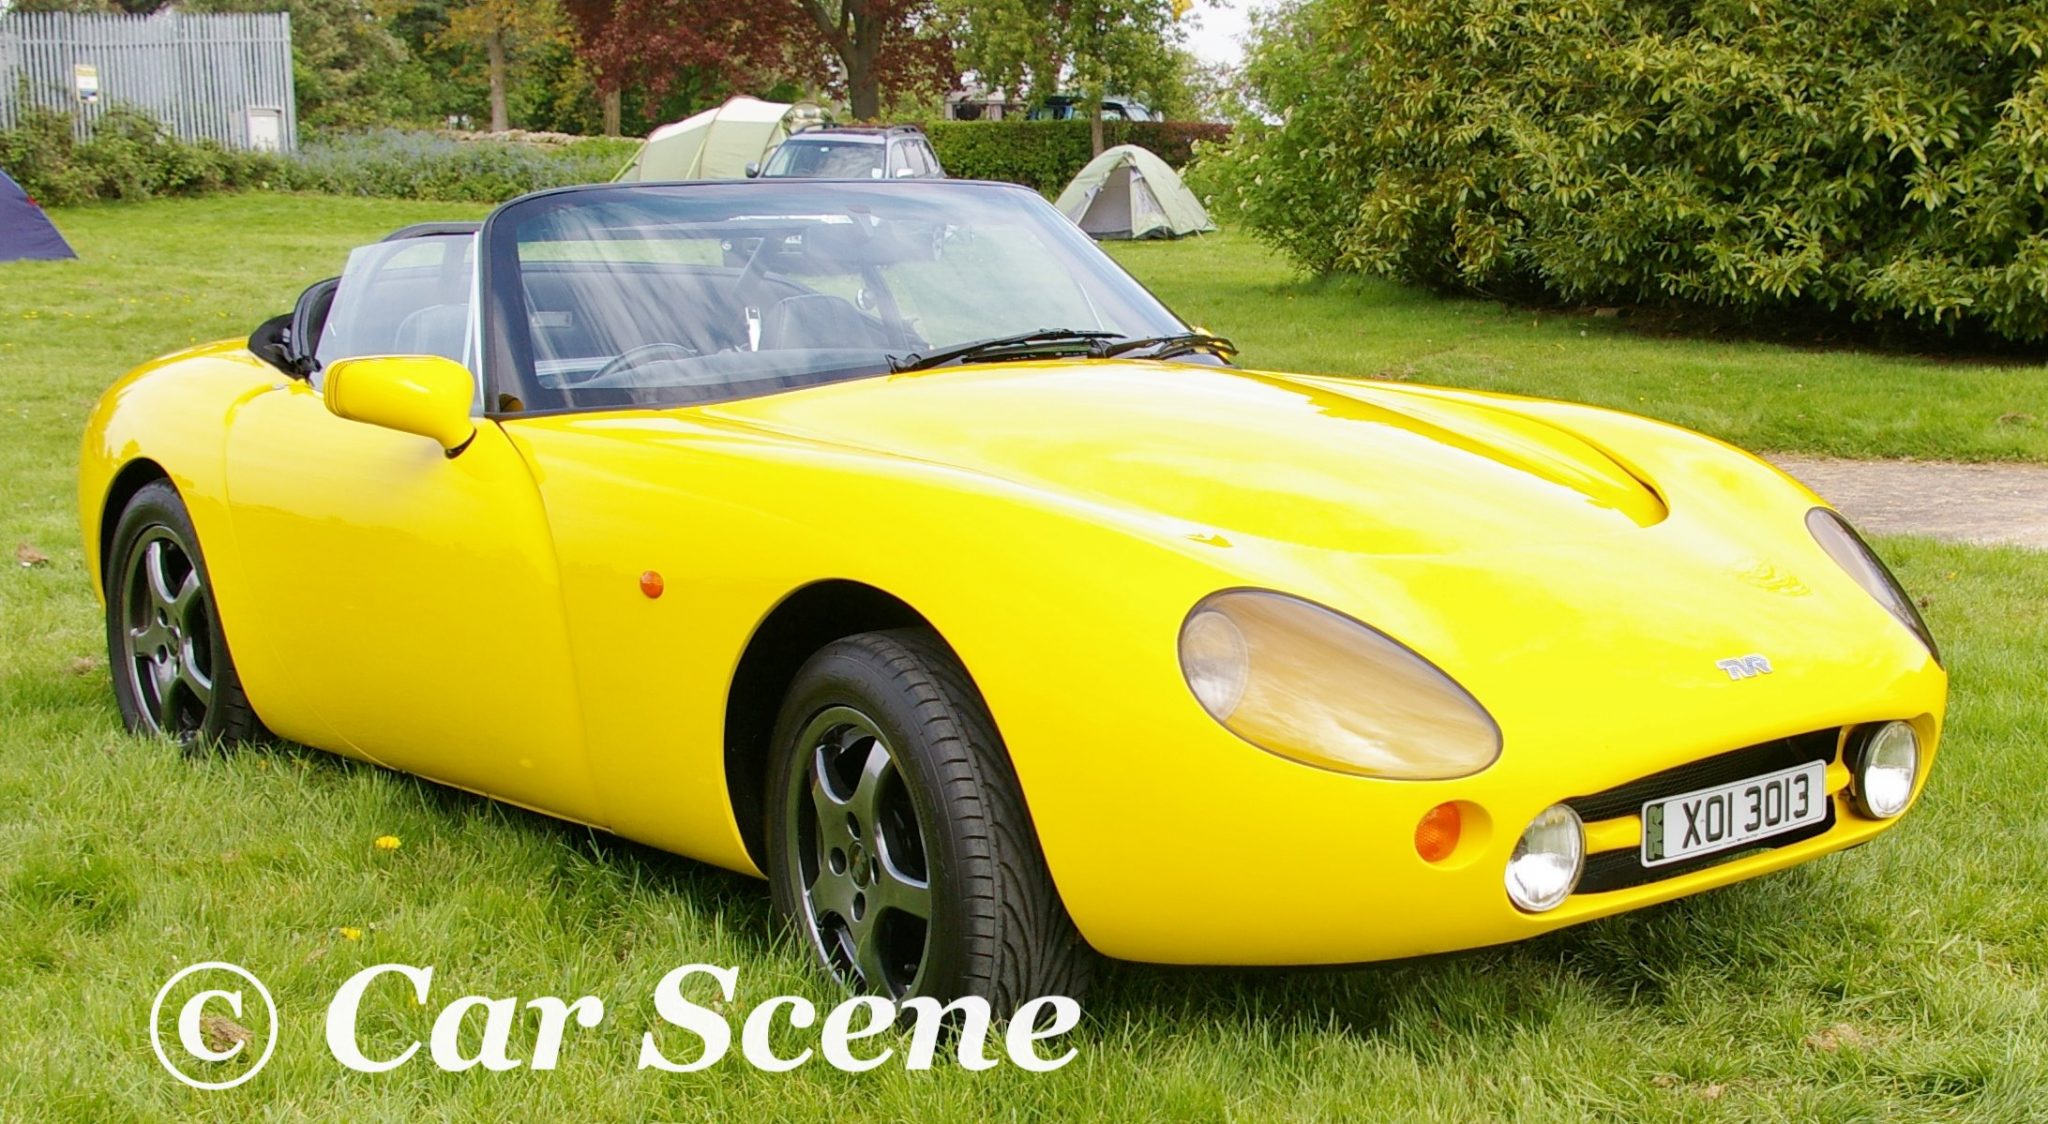 TVR Griffith front three quarters view